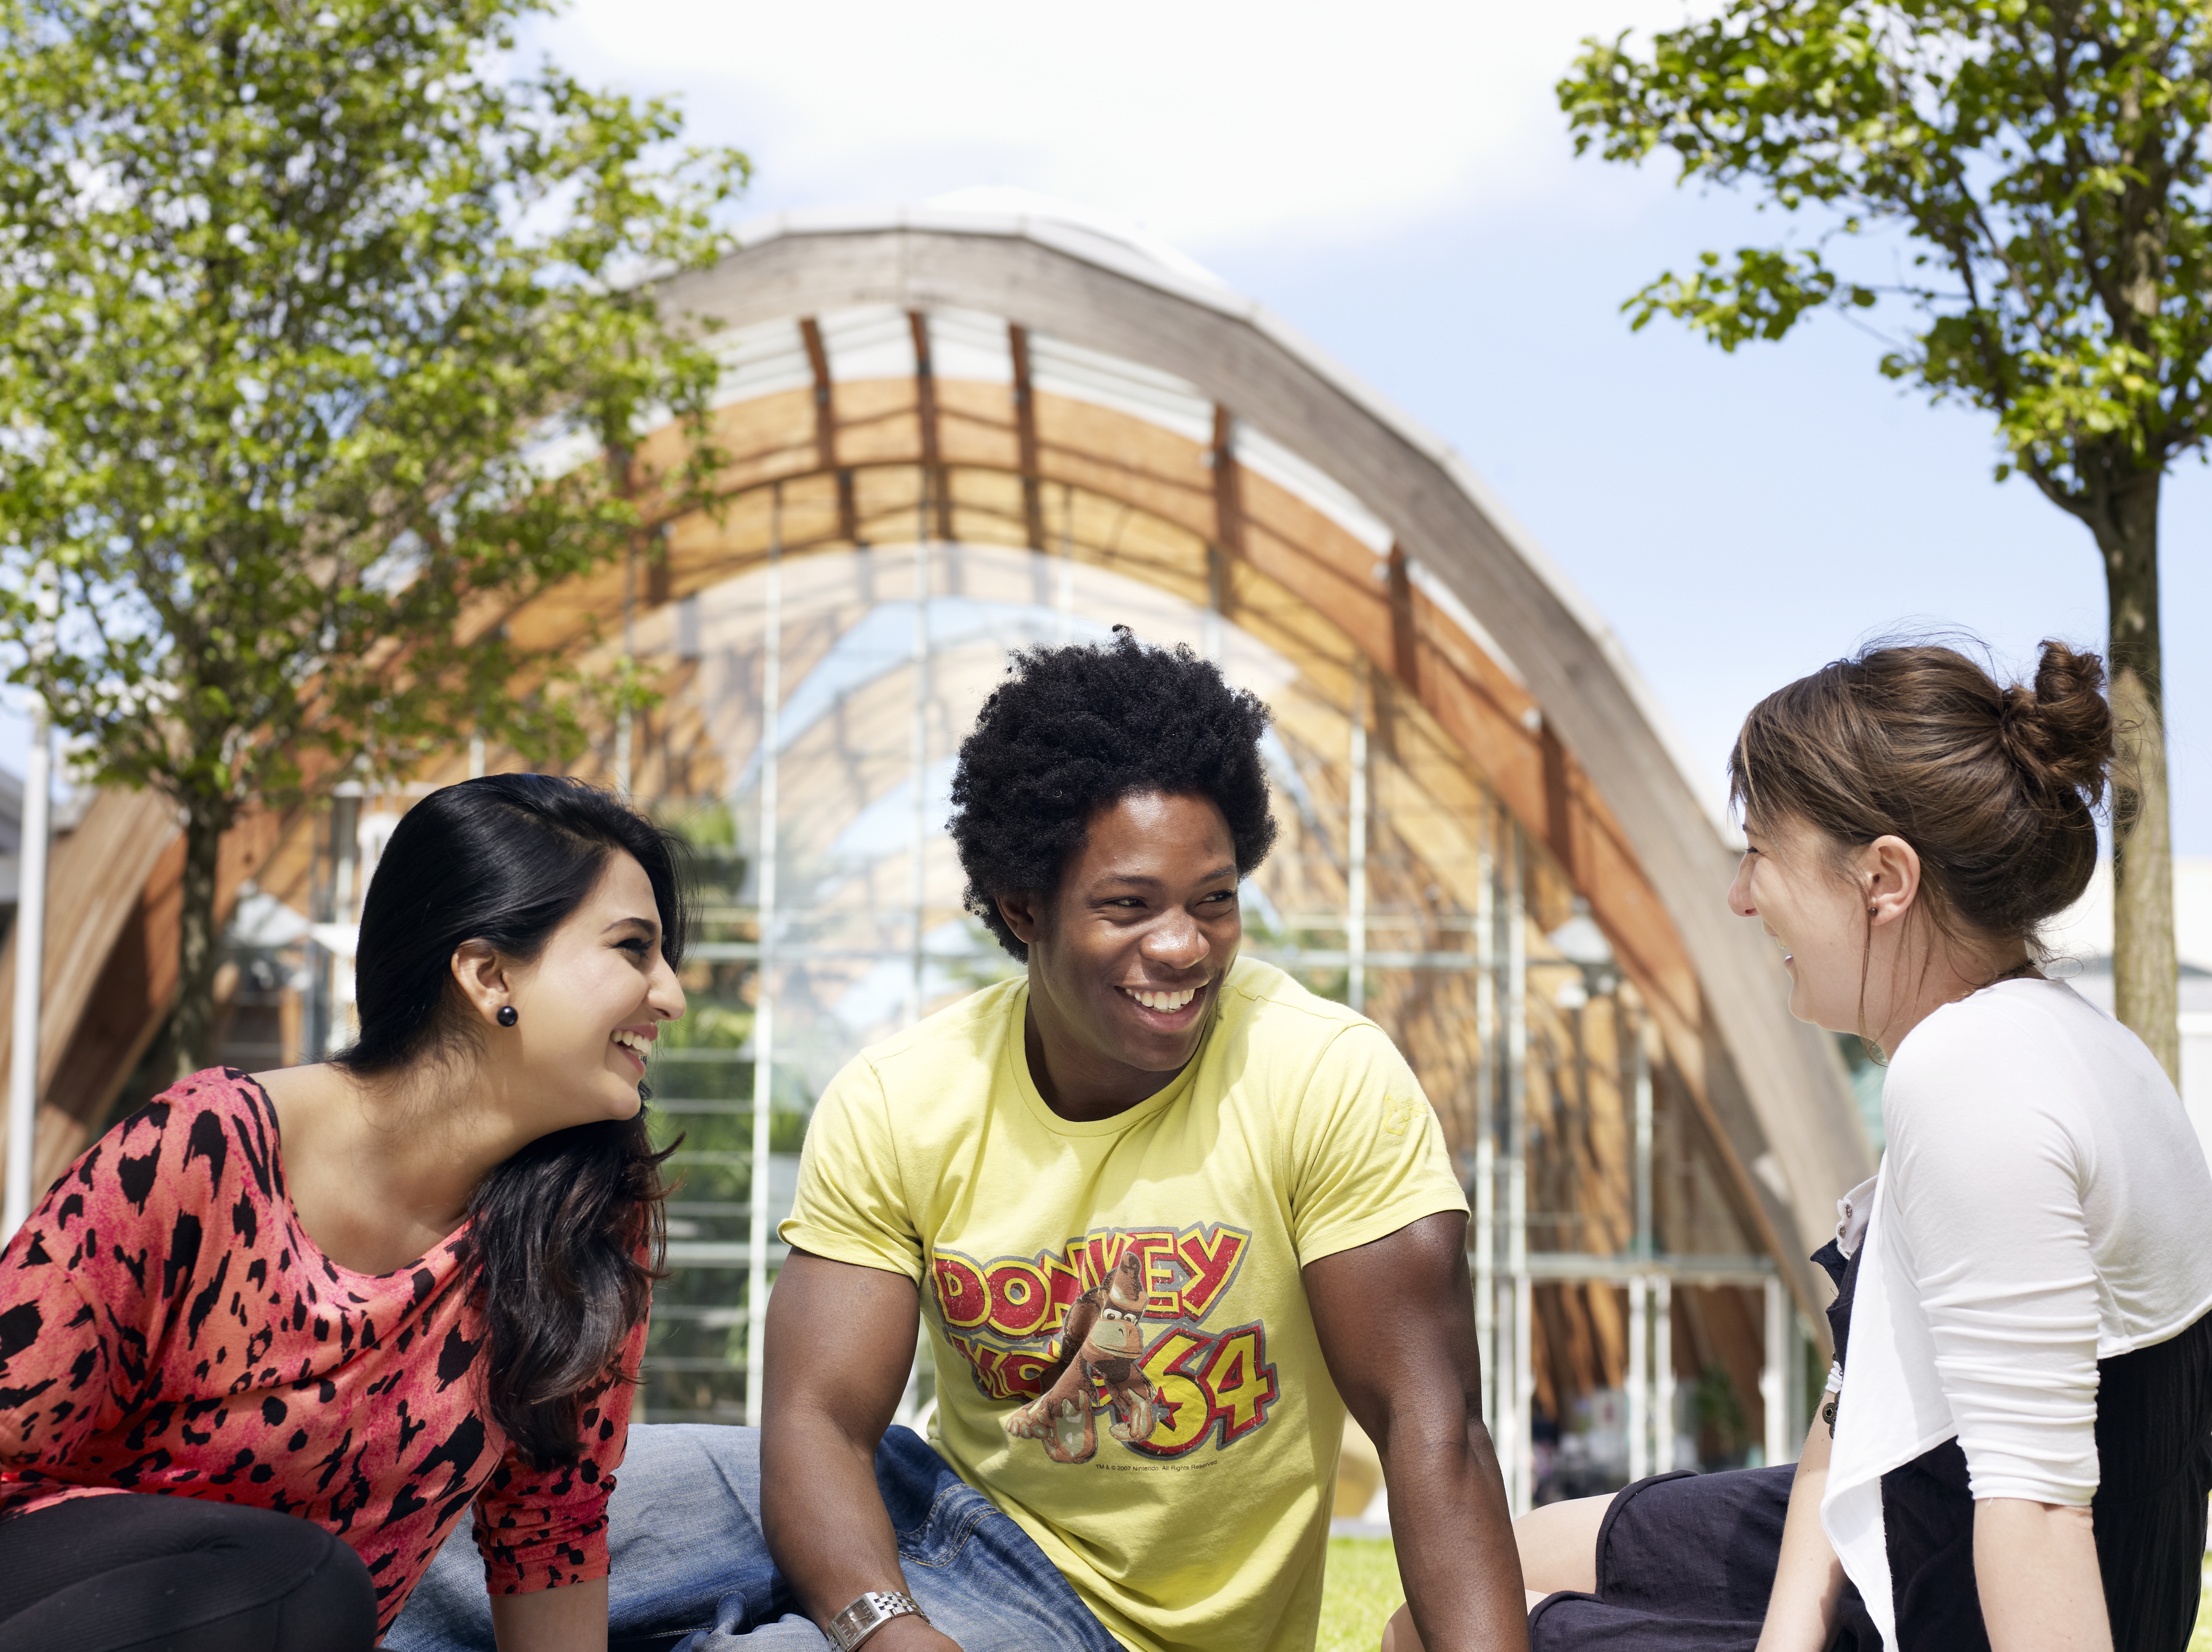 New students: Welcome to Sheffield Hallam